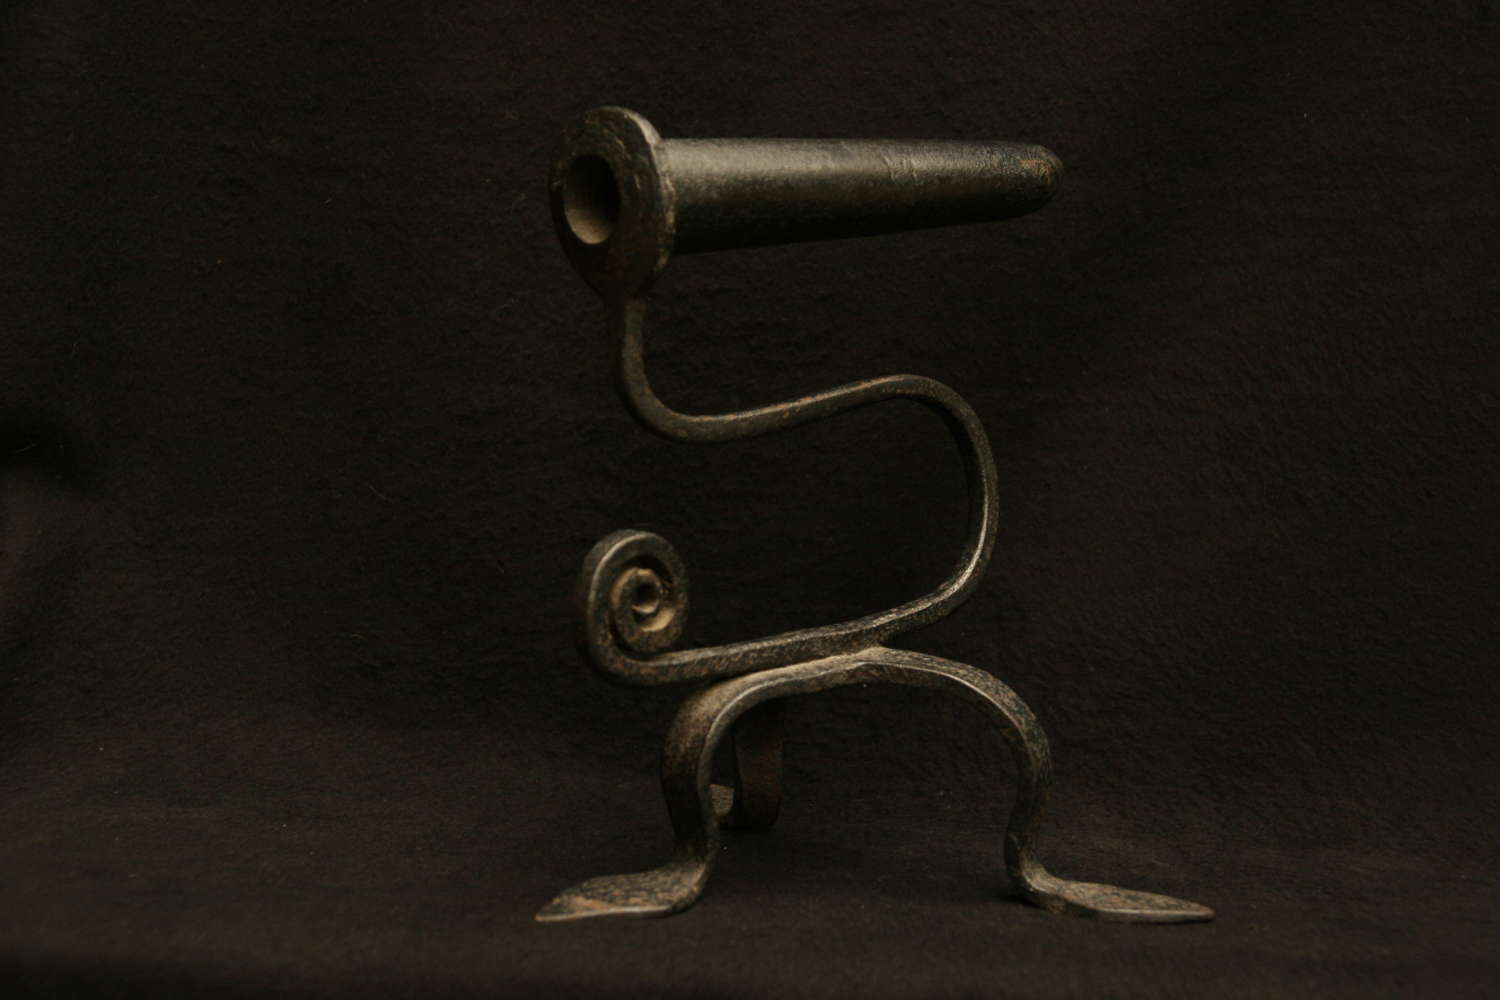 Goffering Iron early 19th century